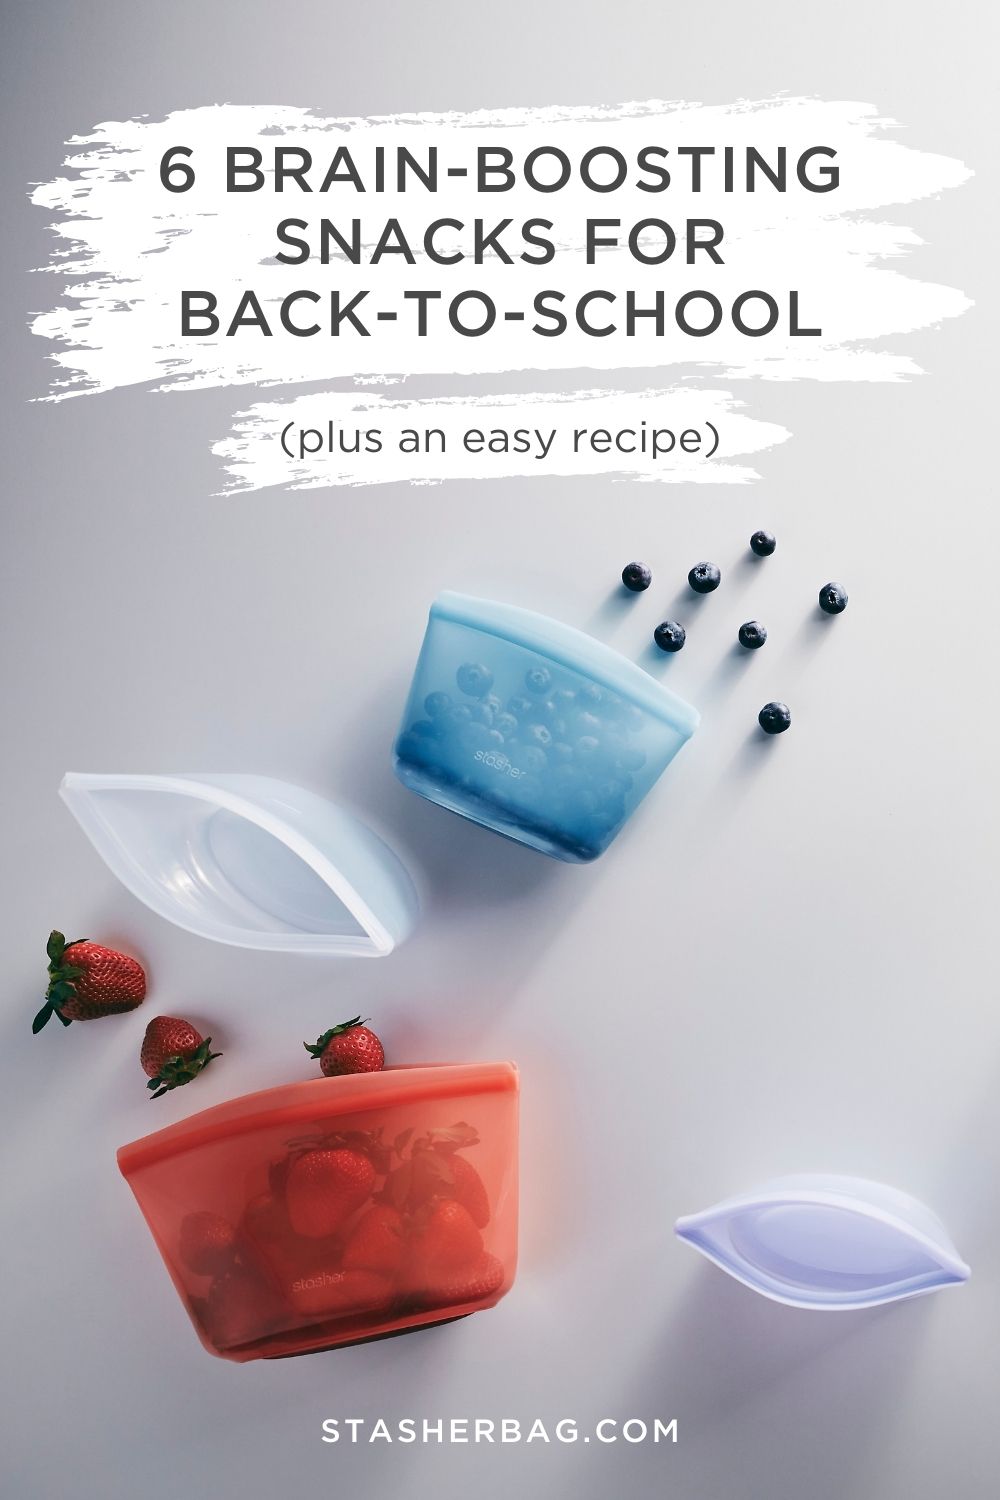 6 Healthy Back-to-School Snacks for Brain Power